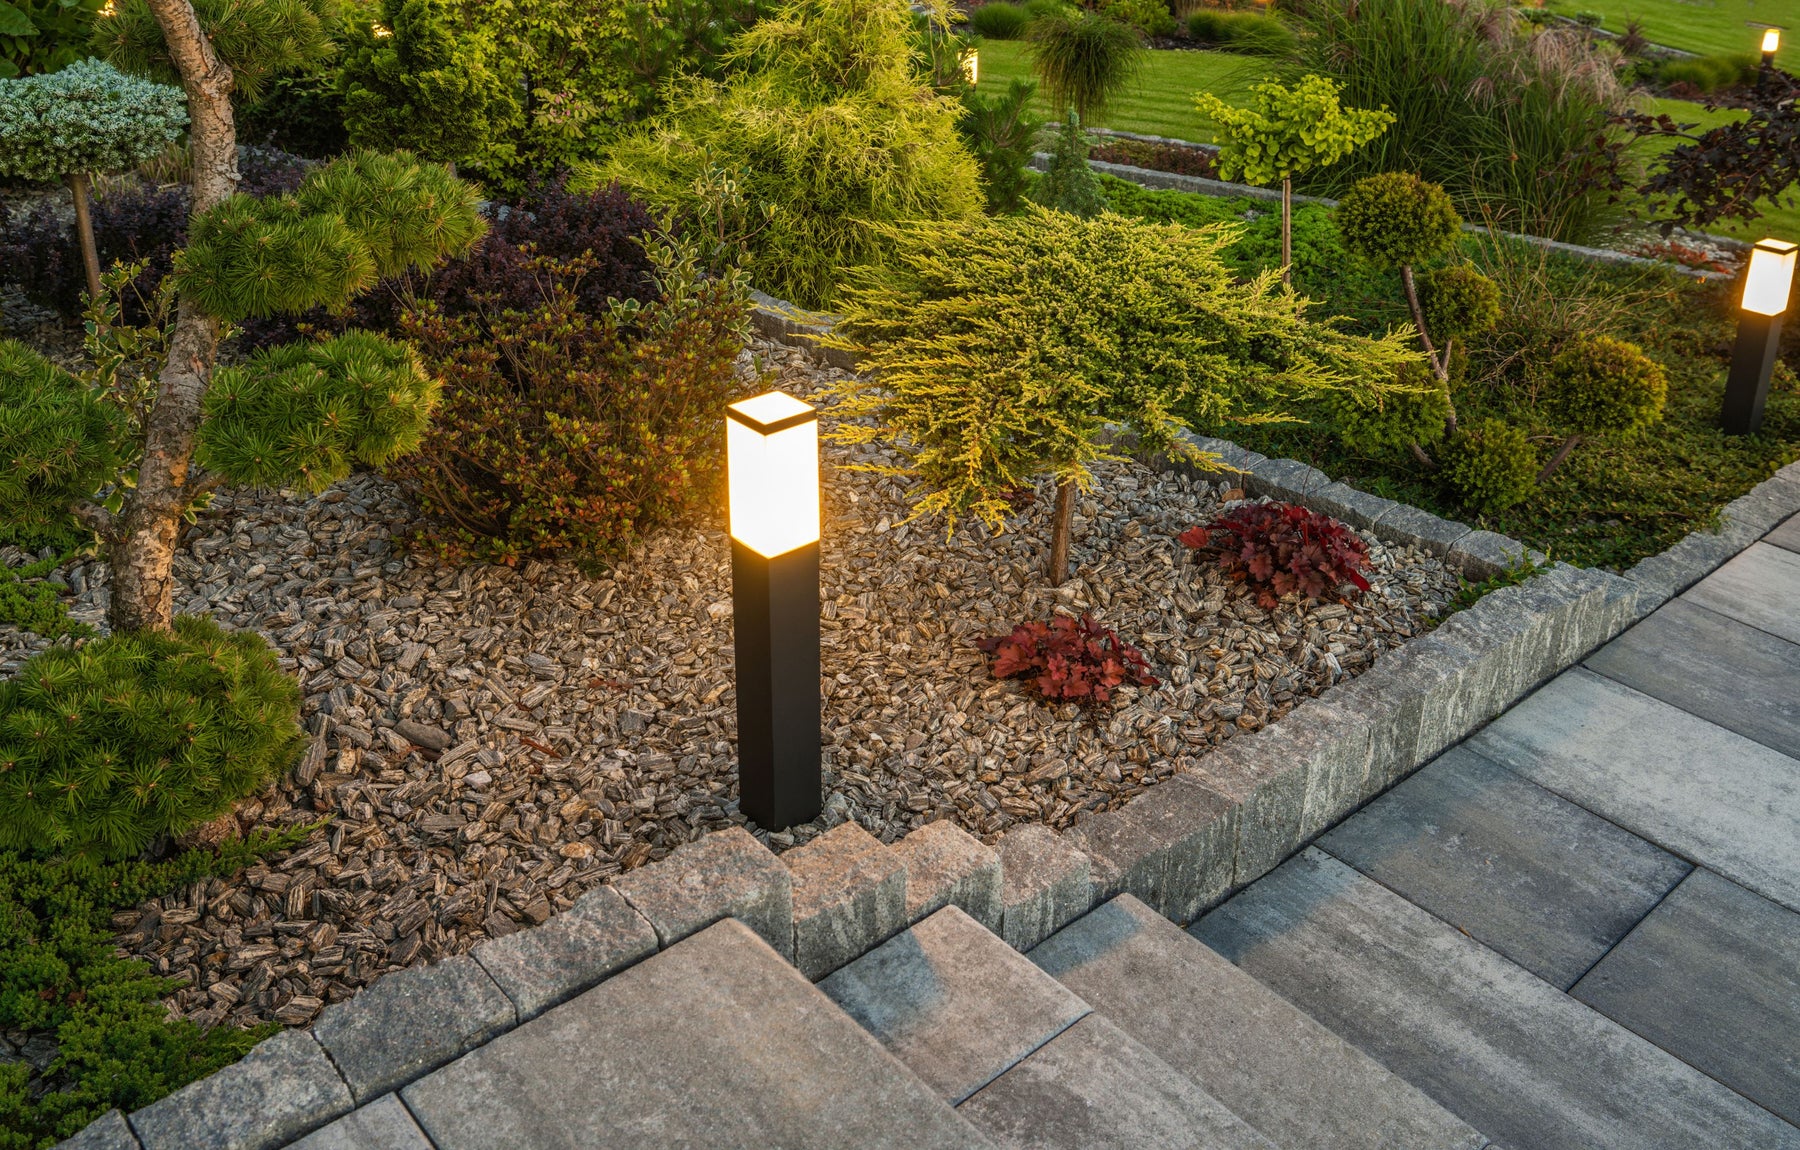 Where to Place Your Landscape Lighting?